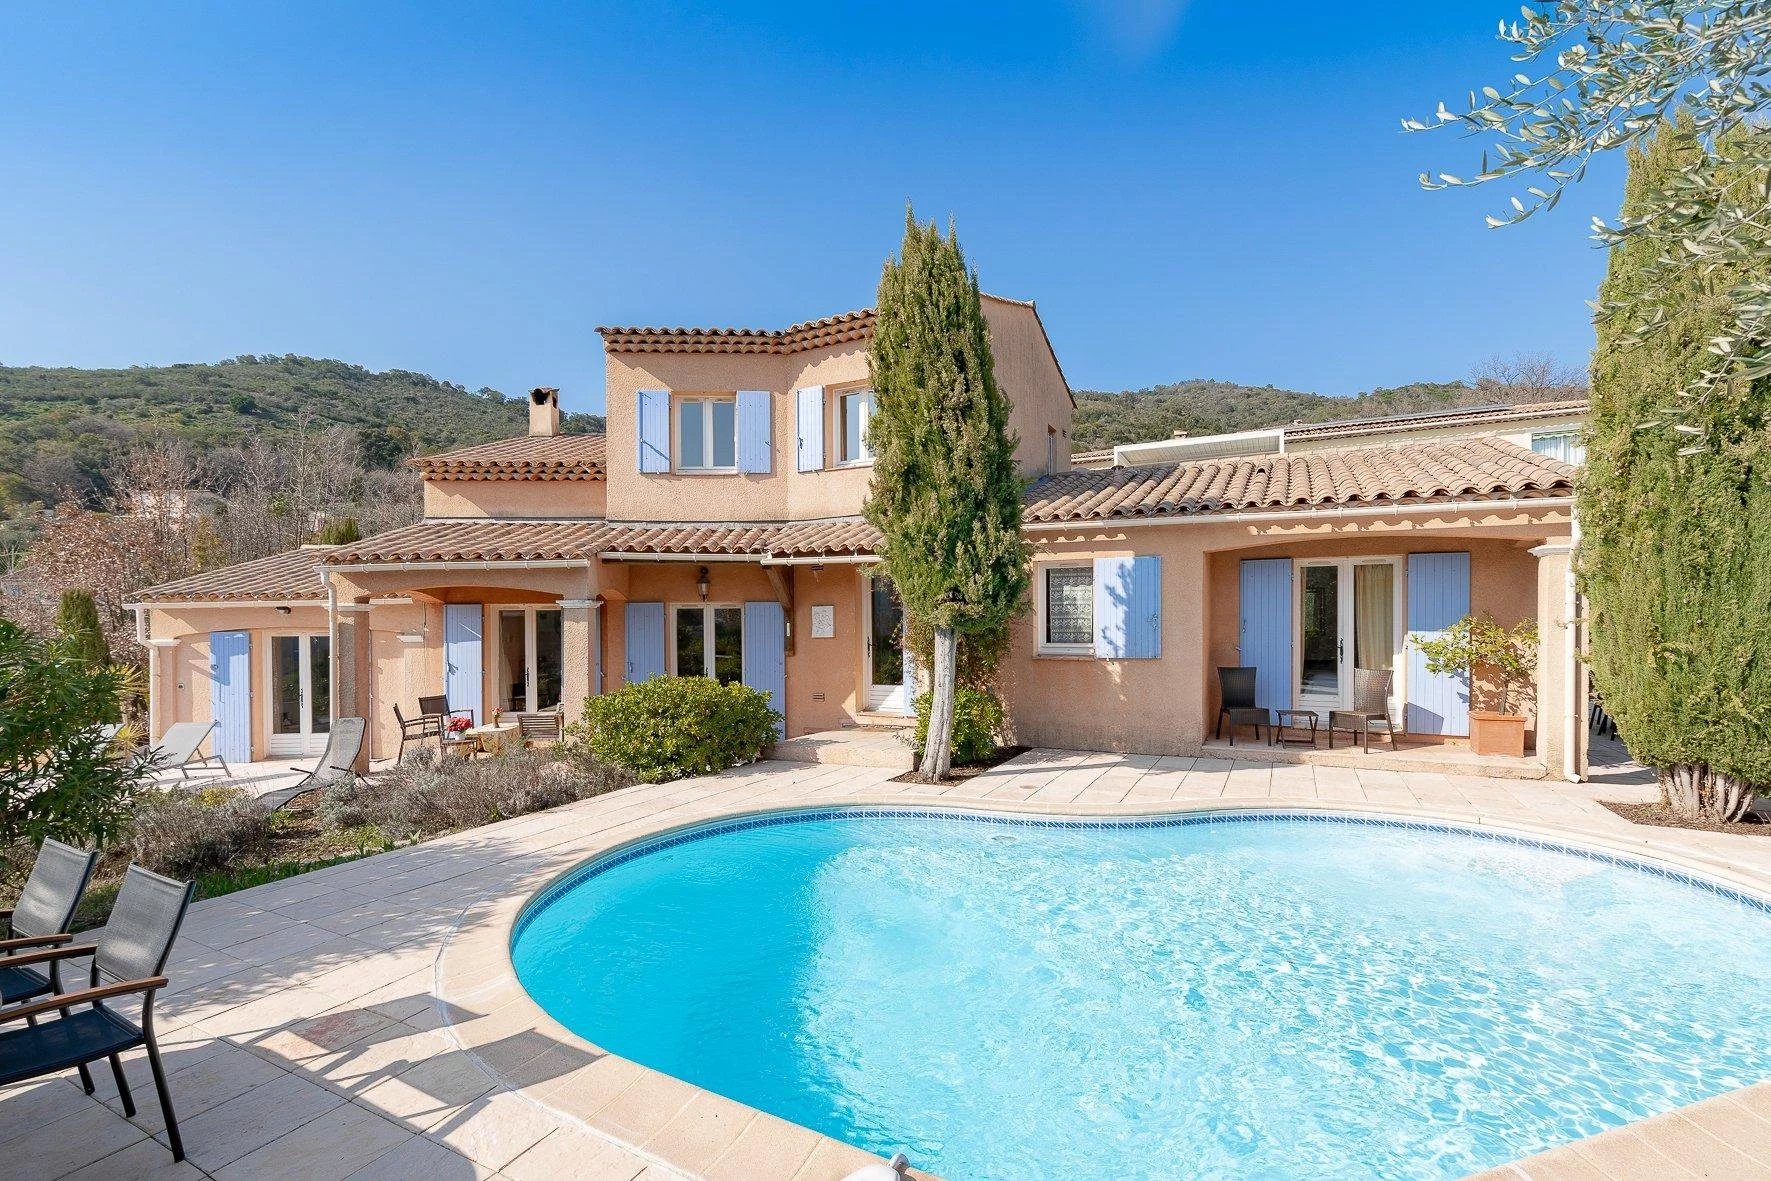 Provencal villa with pool and panoramic view